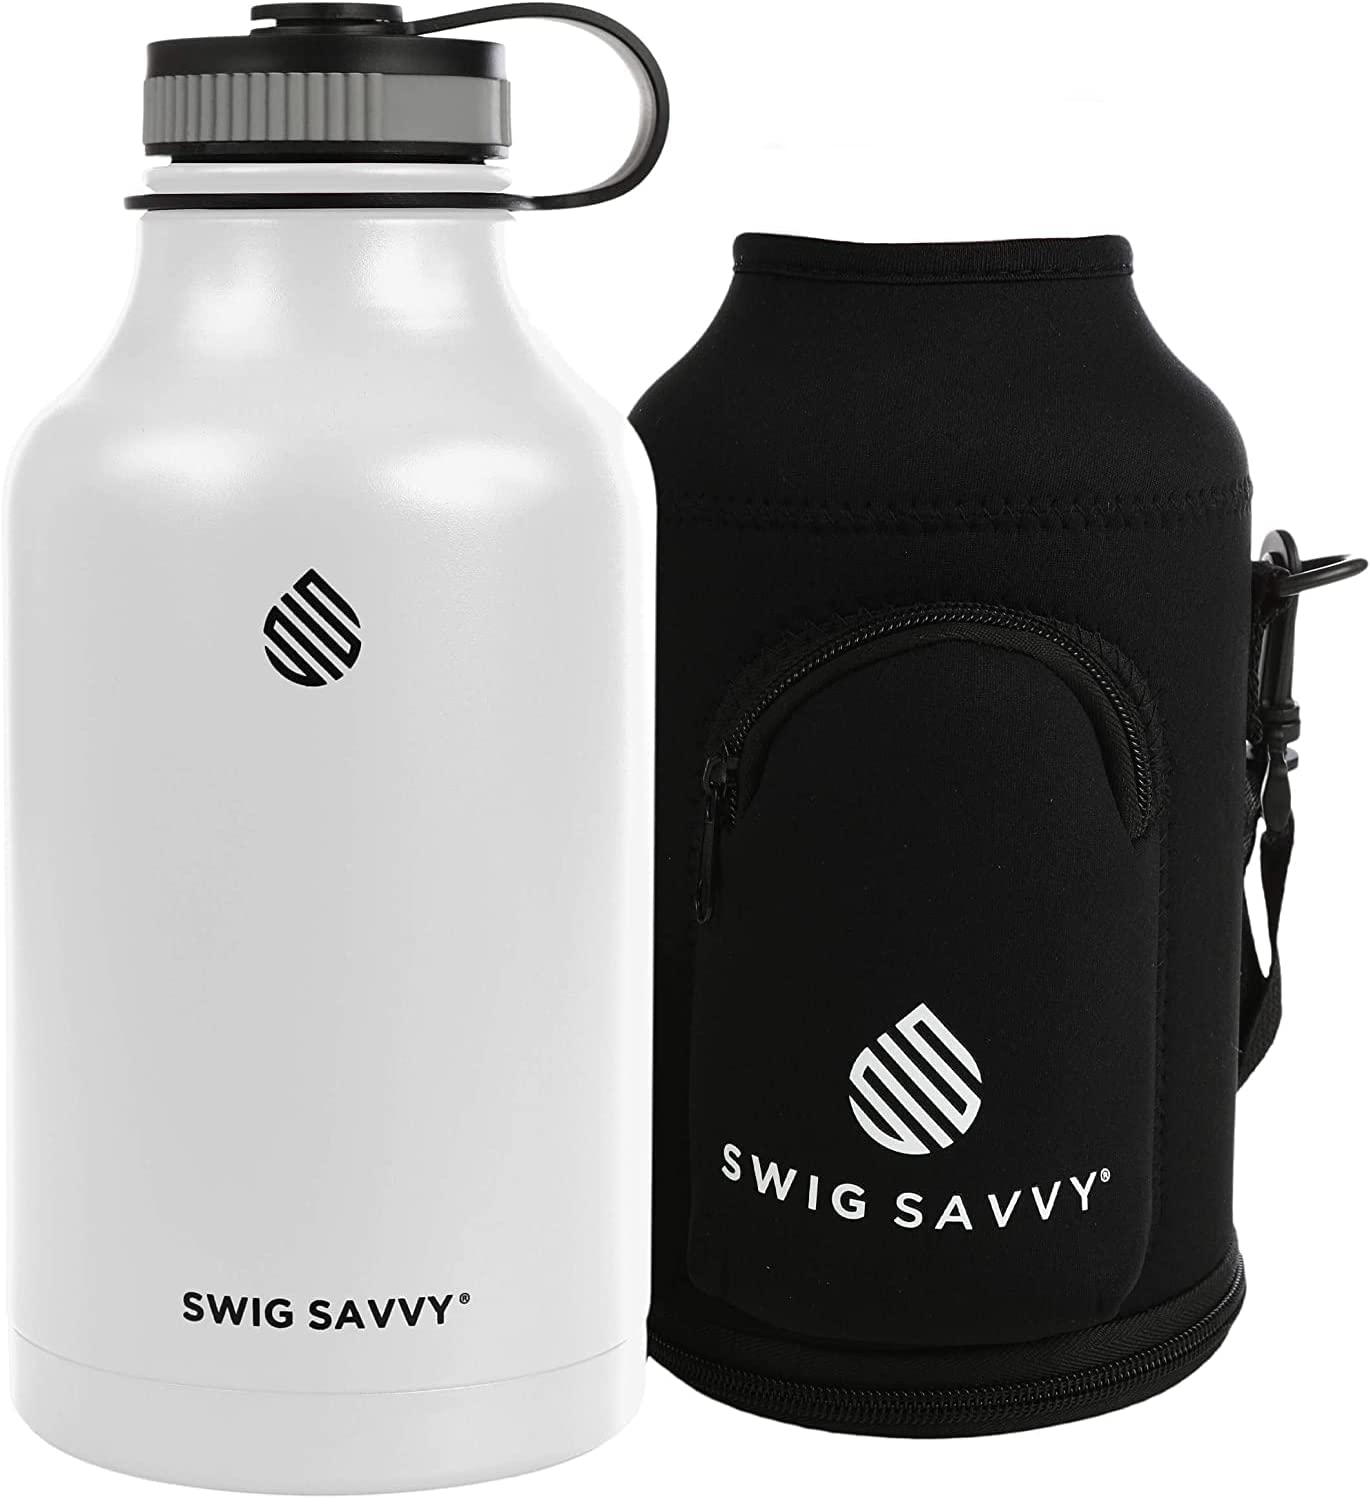 Swig Savvy 64 oz Stainless Steel, Double Wall Growler + Insulating ...